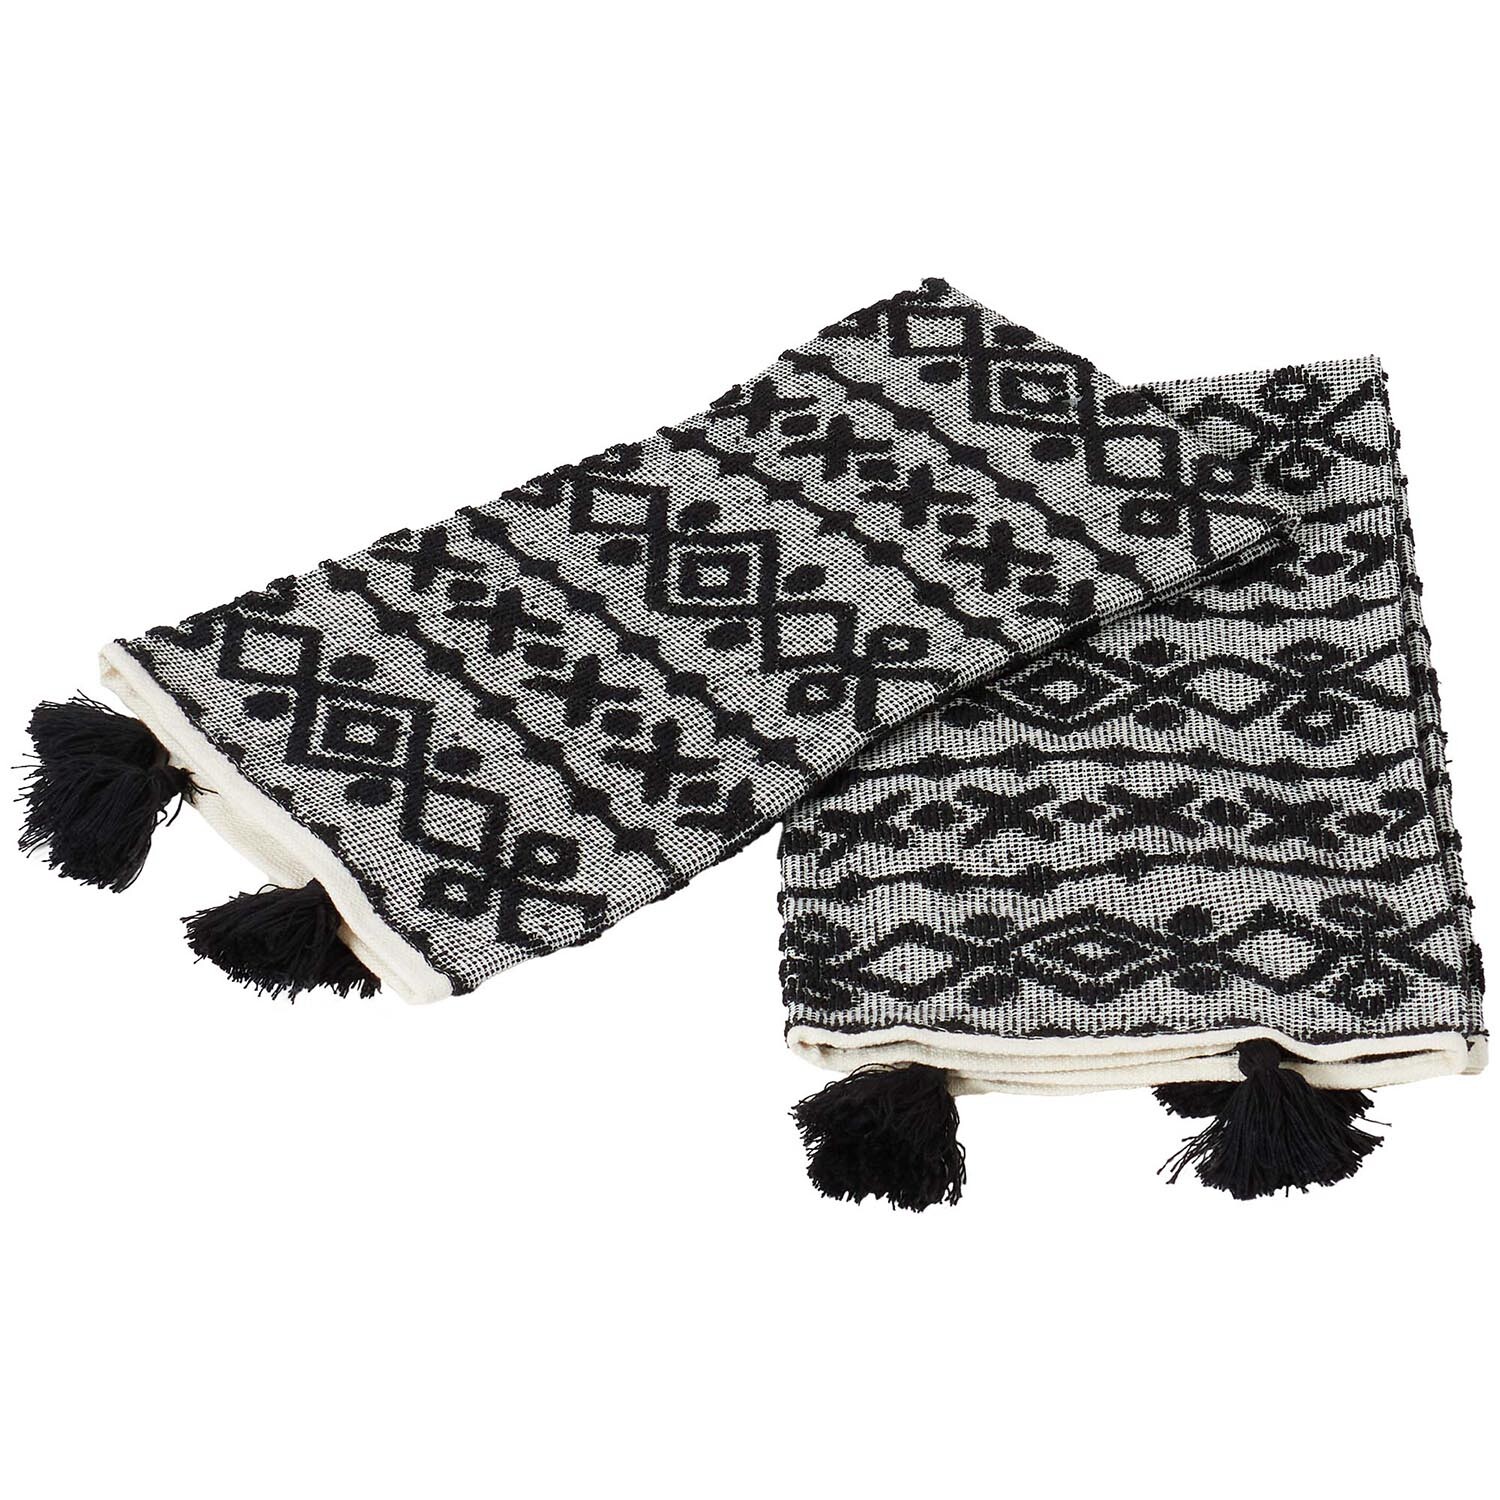 Pack of 2 Jacquard Terry Kitchen Towels with Tassels - Black Image 4